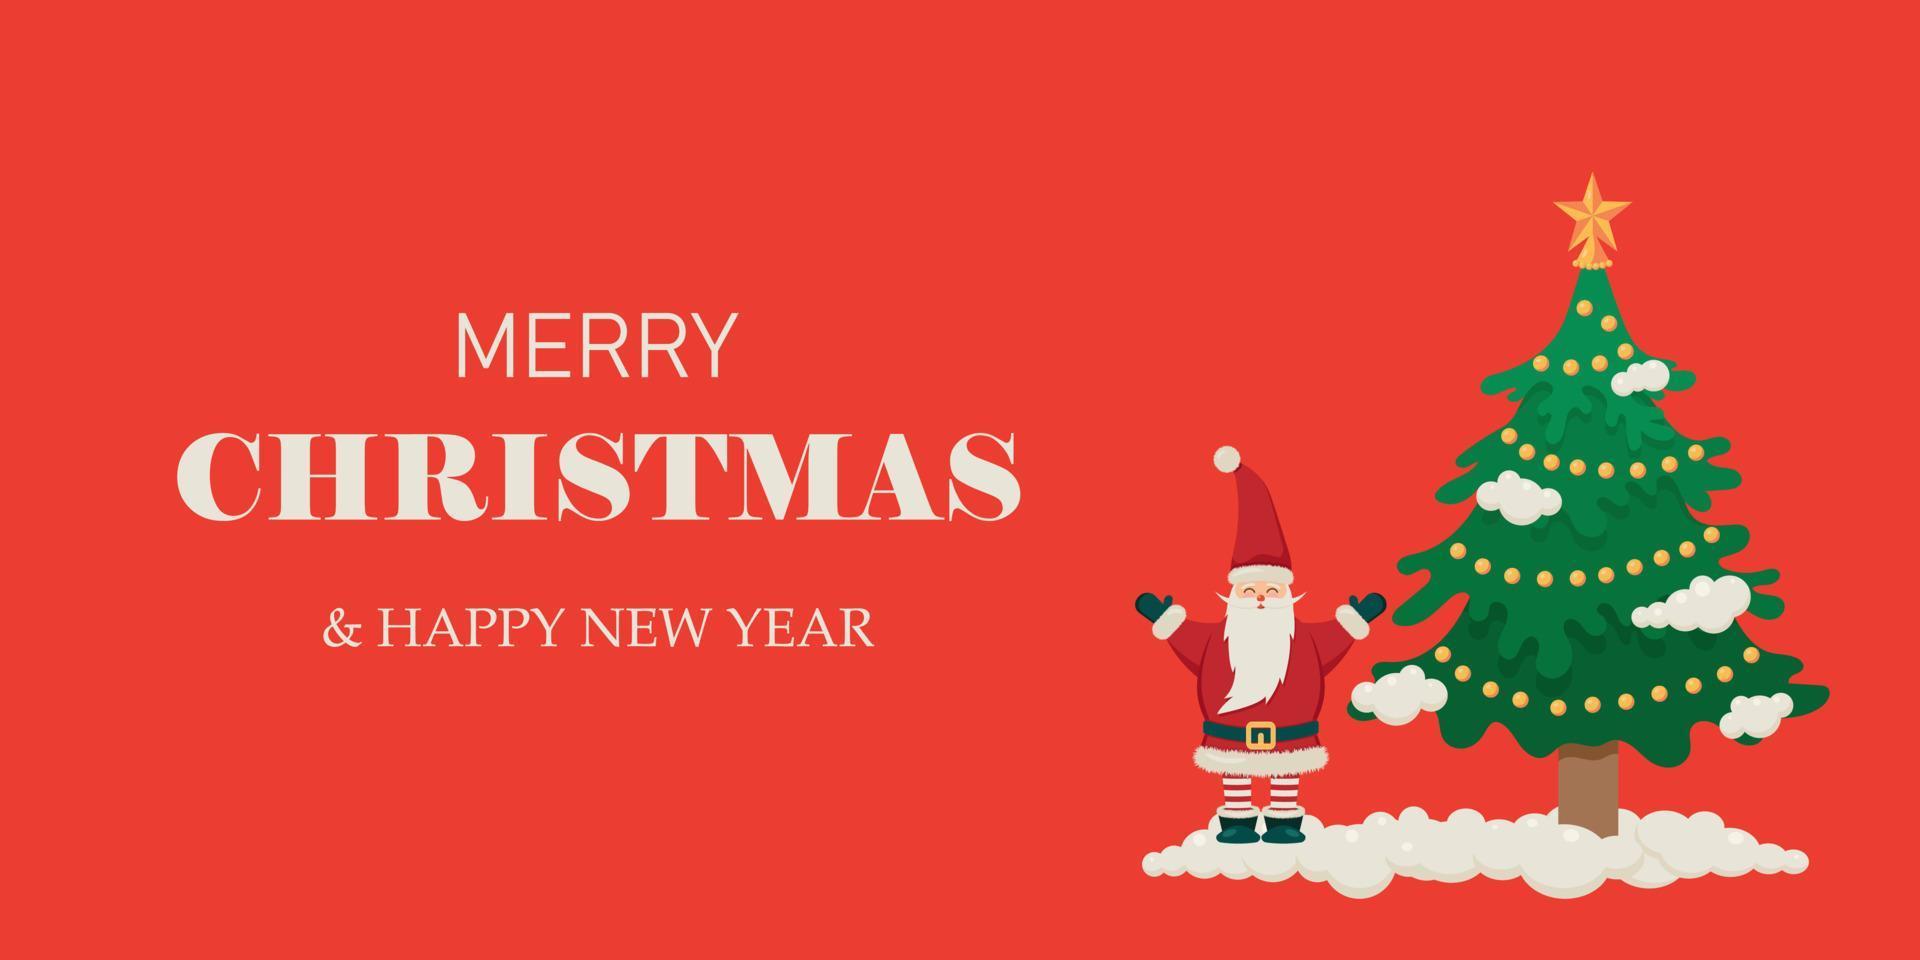 Merry Christmas and New Year banner with Santa Claus and Christmas tree on red background. vector illustration